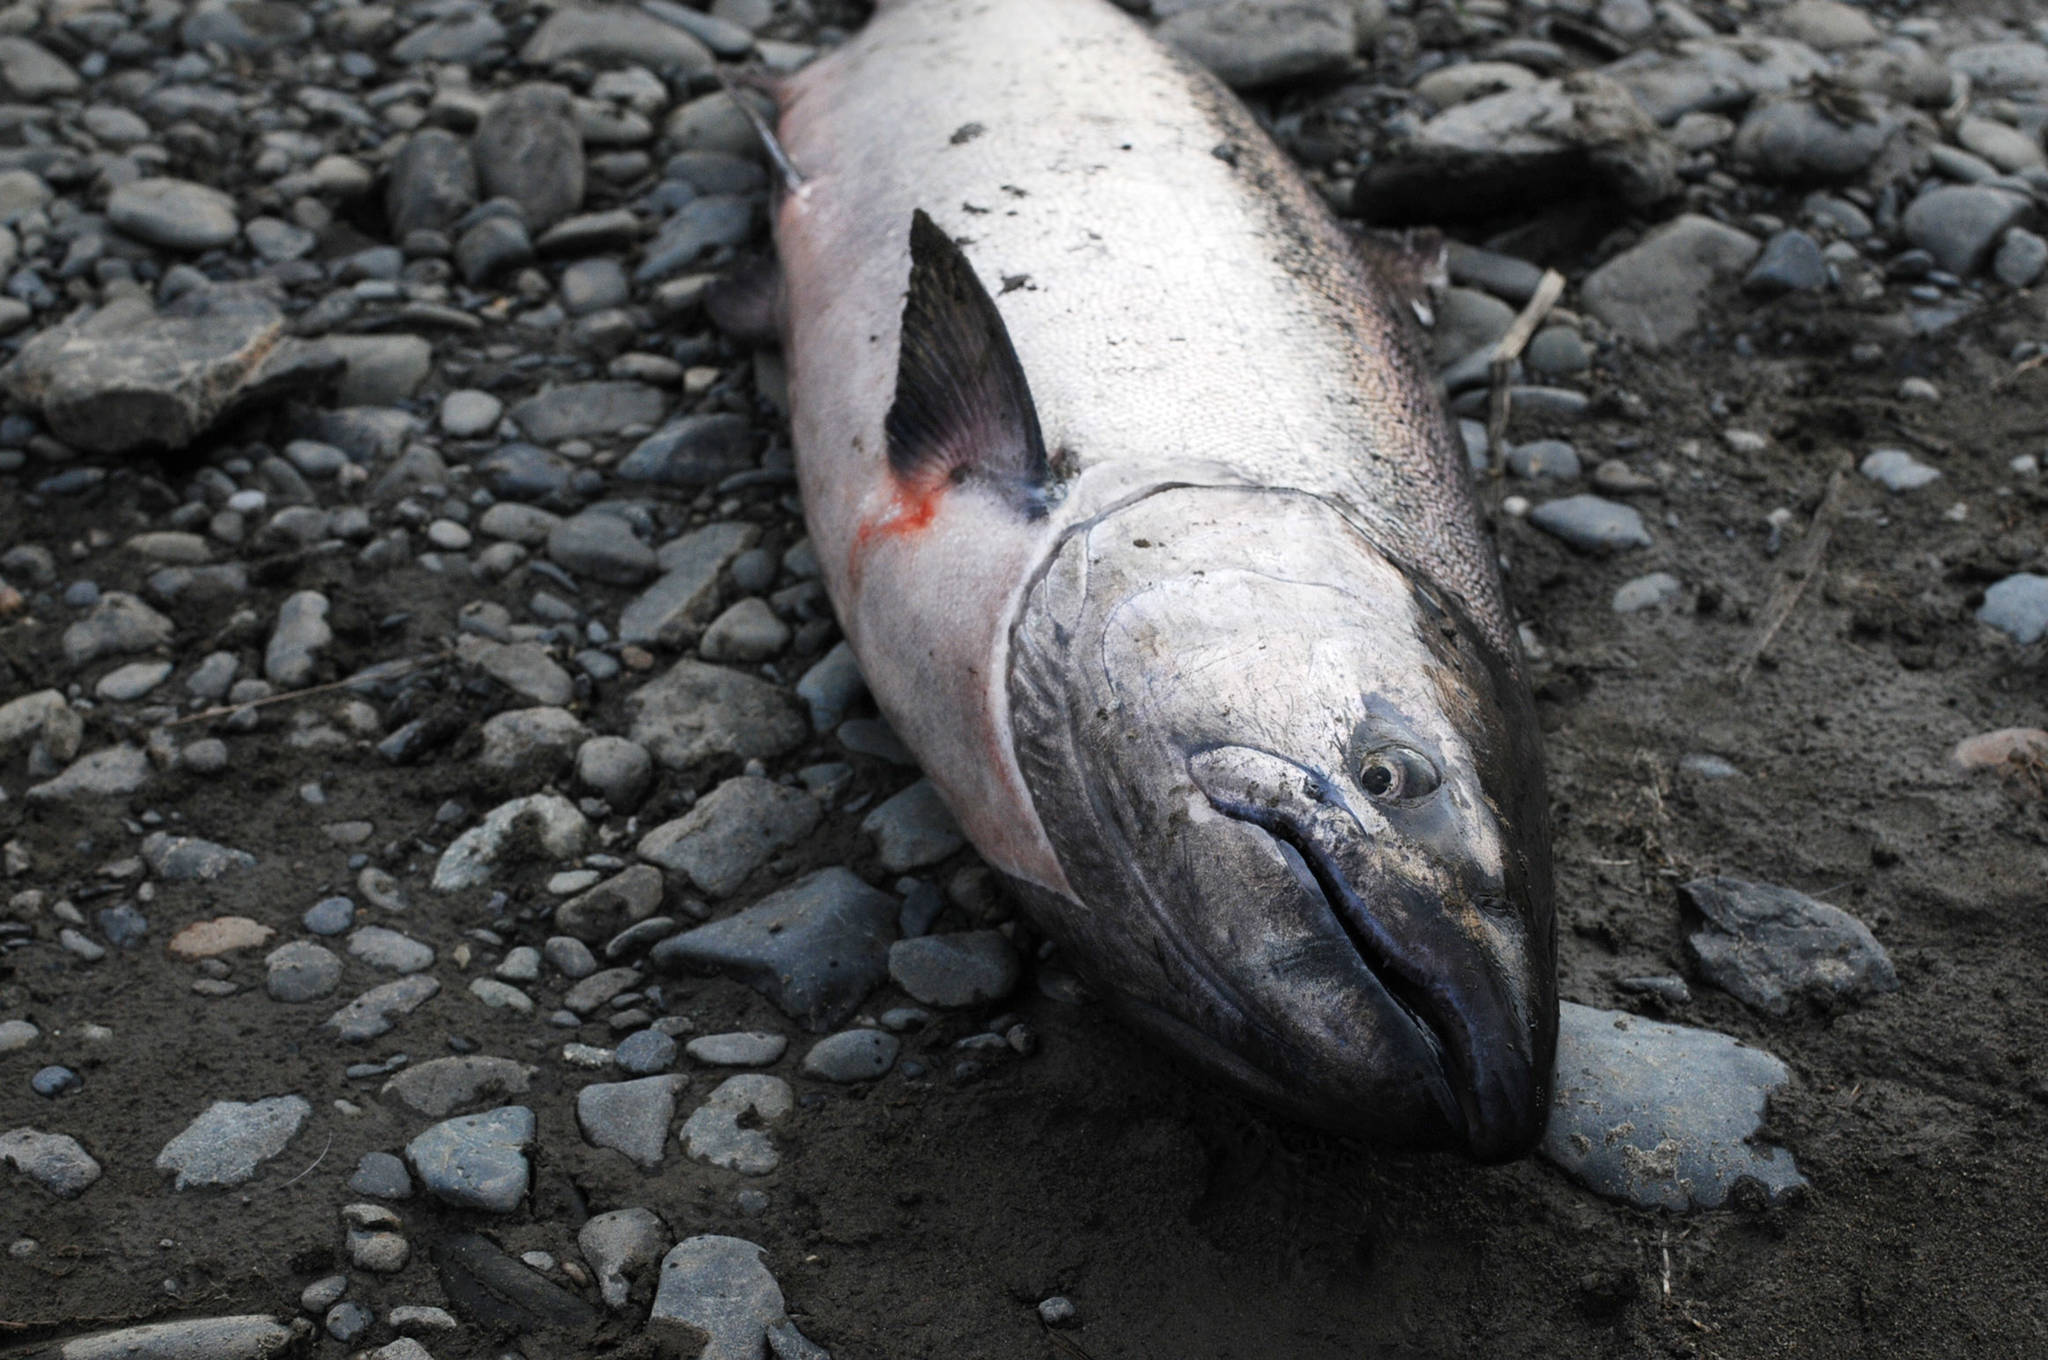 An Anchor River king salmon landed by Anchorage resident Terry Umatum lies on the bank Saturday, May 19, 2018 in Anchor Point, Alaska. The Anchor River opening May 19 was the first chance for freshwater anglers on the Kenai Peninsula to catch king salmon. Saturday proved a slow morning for fishing — Umatum said he waited about 5 hours to catch his king — though it’s still early in the season. The Alaska Department of Fish and Game’s weir on the Anchor River has counted precisely zero kings so far this year, as of May 17, though the weir is positioned several miles upriver from the mouth. (Photo by Elizabeth Earl/Peninsula Clarion)